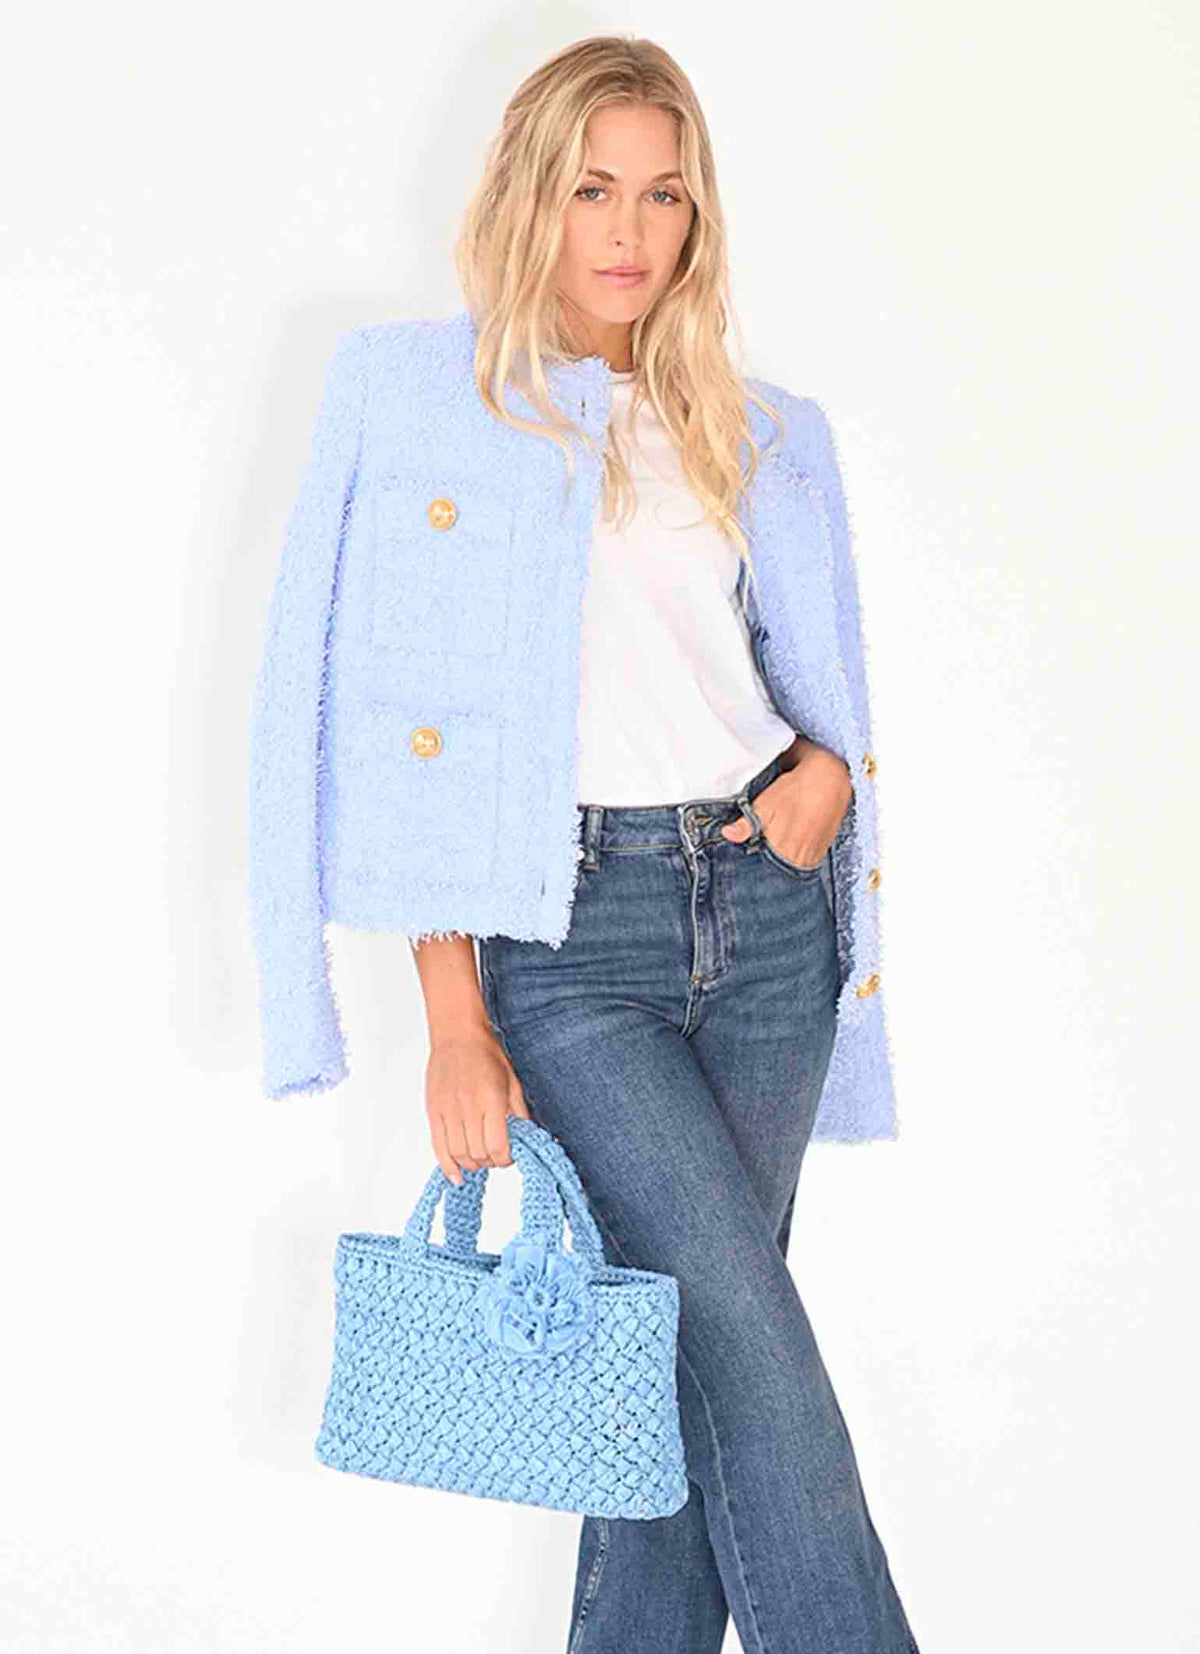 Women carries Baby blue Positano Raffia tote Bag from Carmen Sol, Italia collection